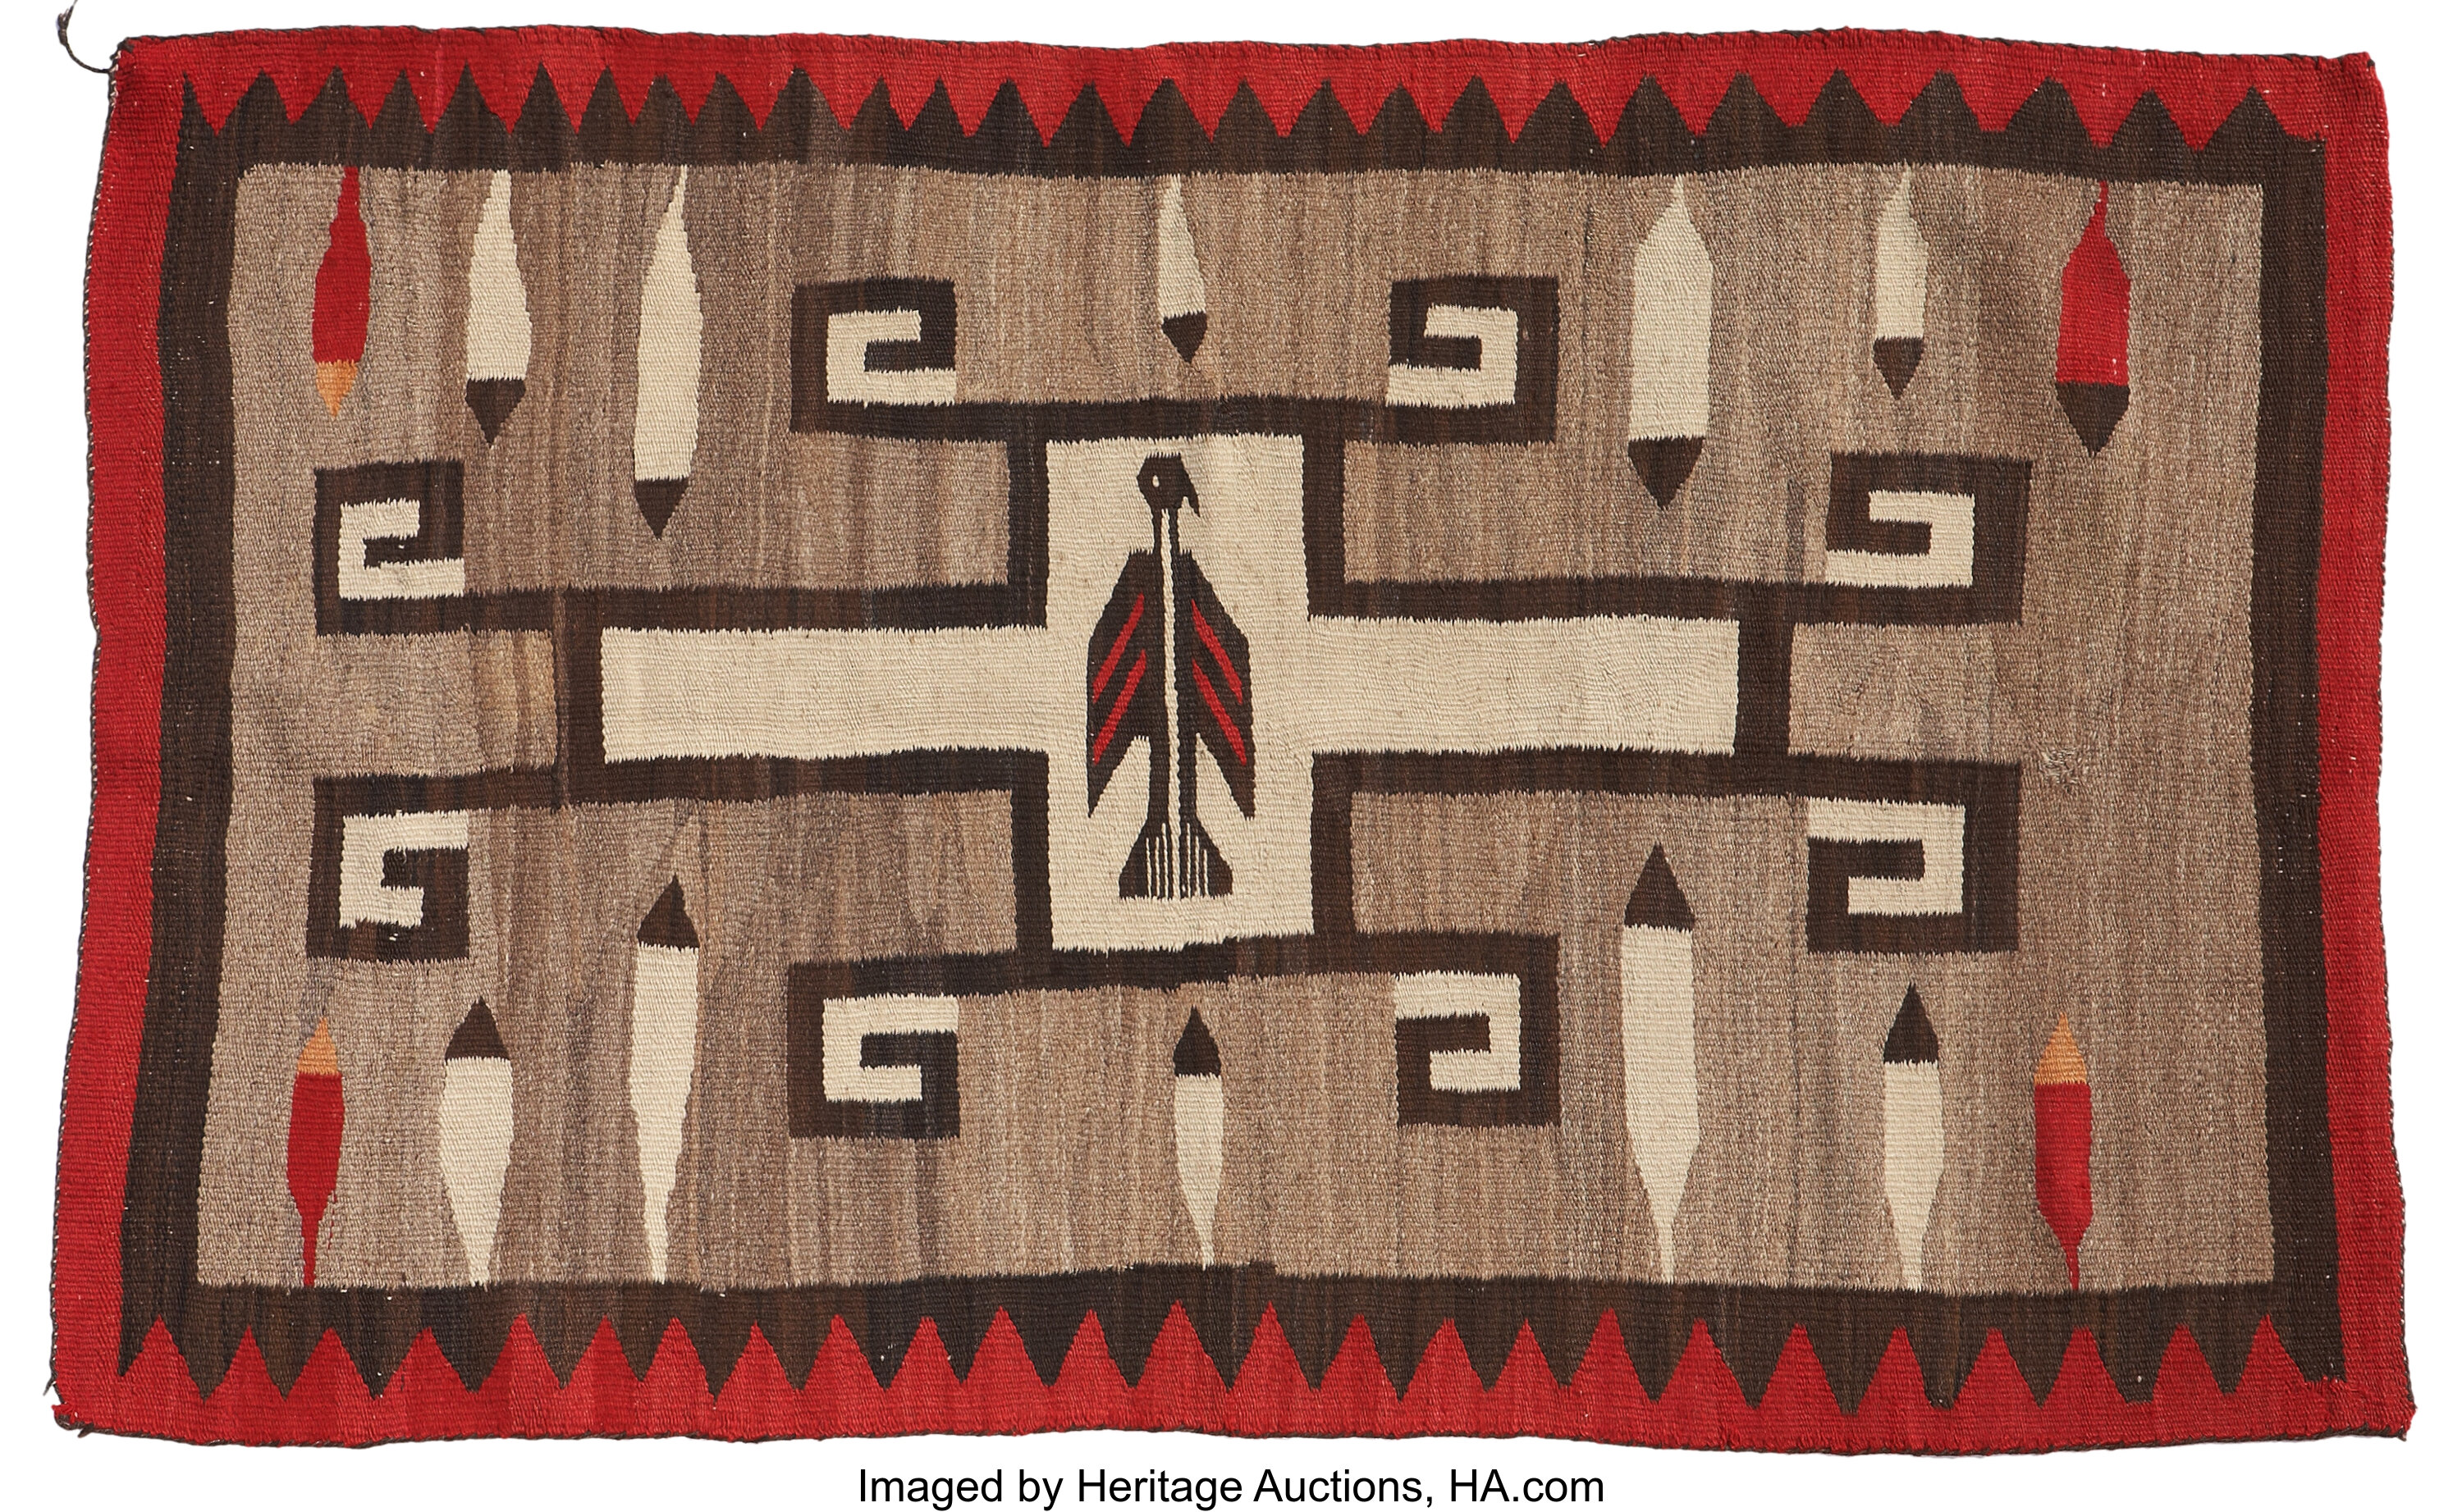 A NAVAJO REGIONAL RUG. c. 1930... Other | Lot #55040 | Heritage Auctions